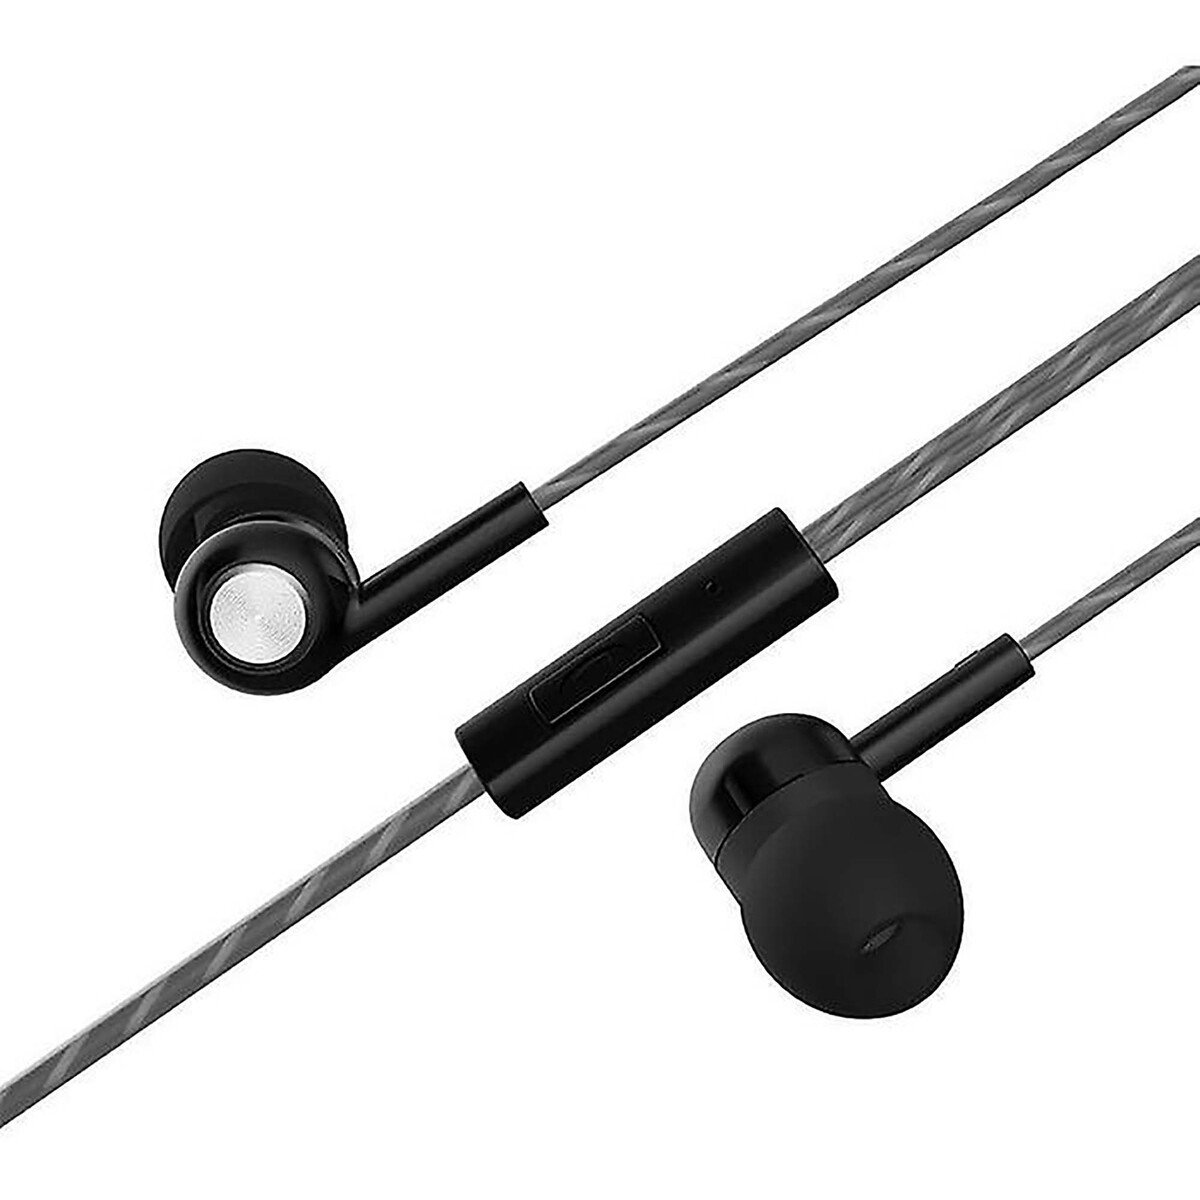 Motorola Pace 115 In-Ear Headphones, Rich HD Sound, Tangle-Free Cable Black